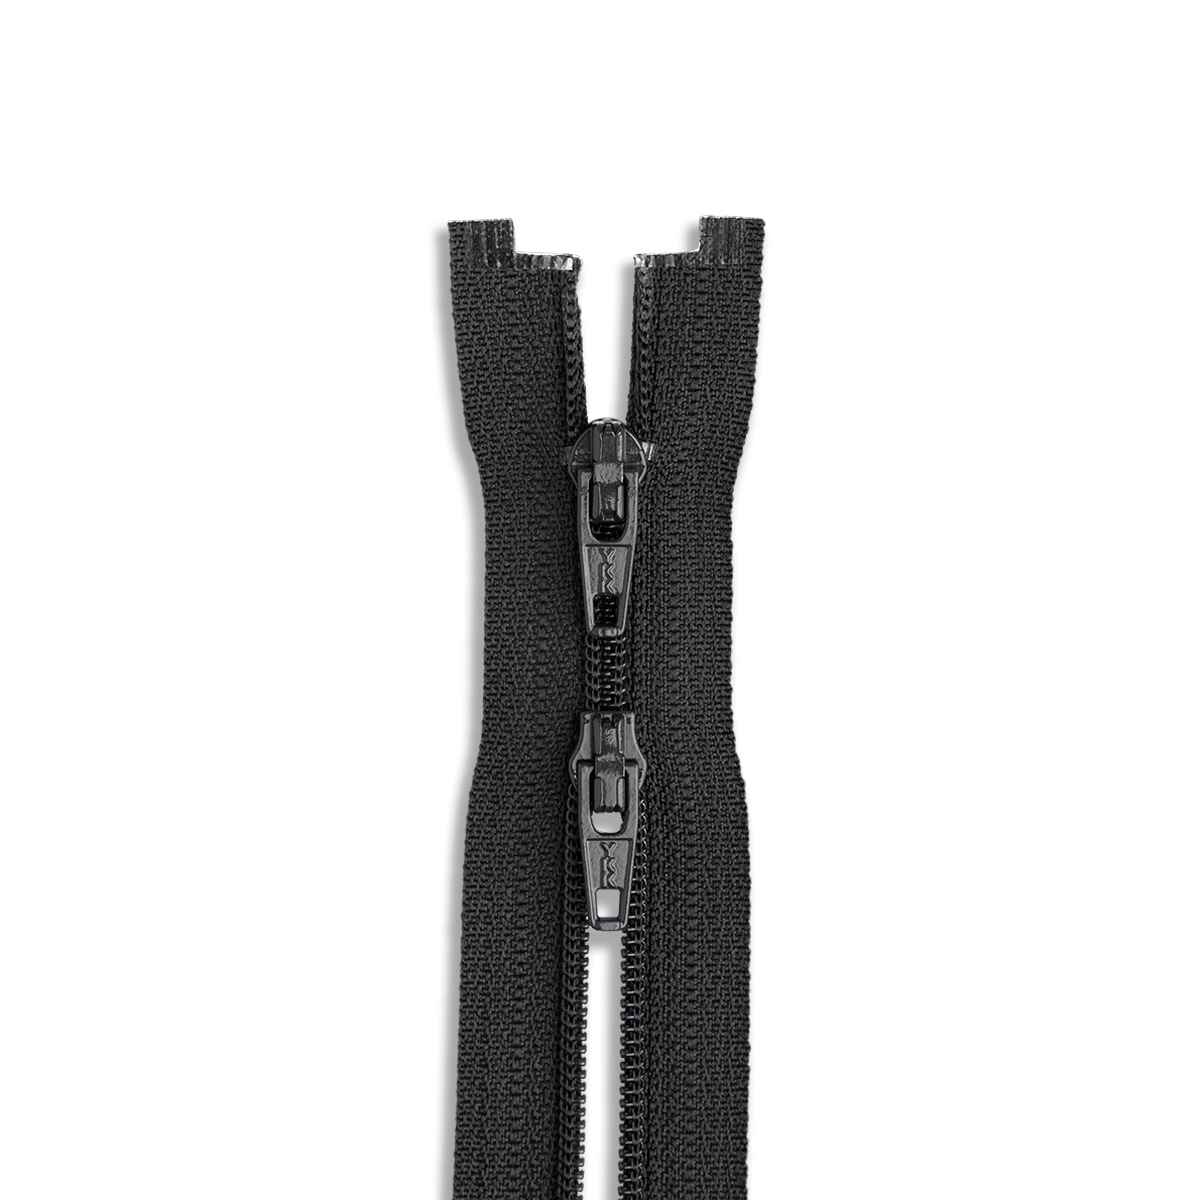 YKK develops new magnetic zipper for easy open-close - Specialty